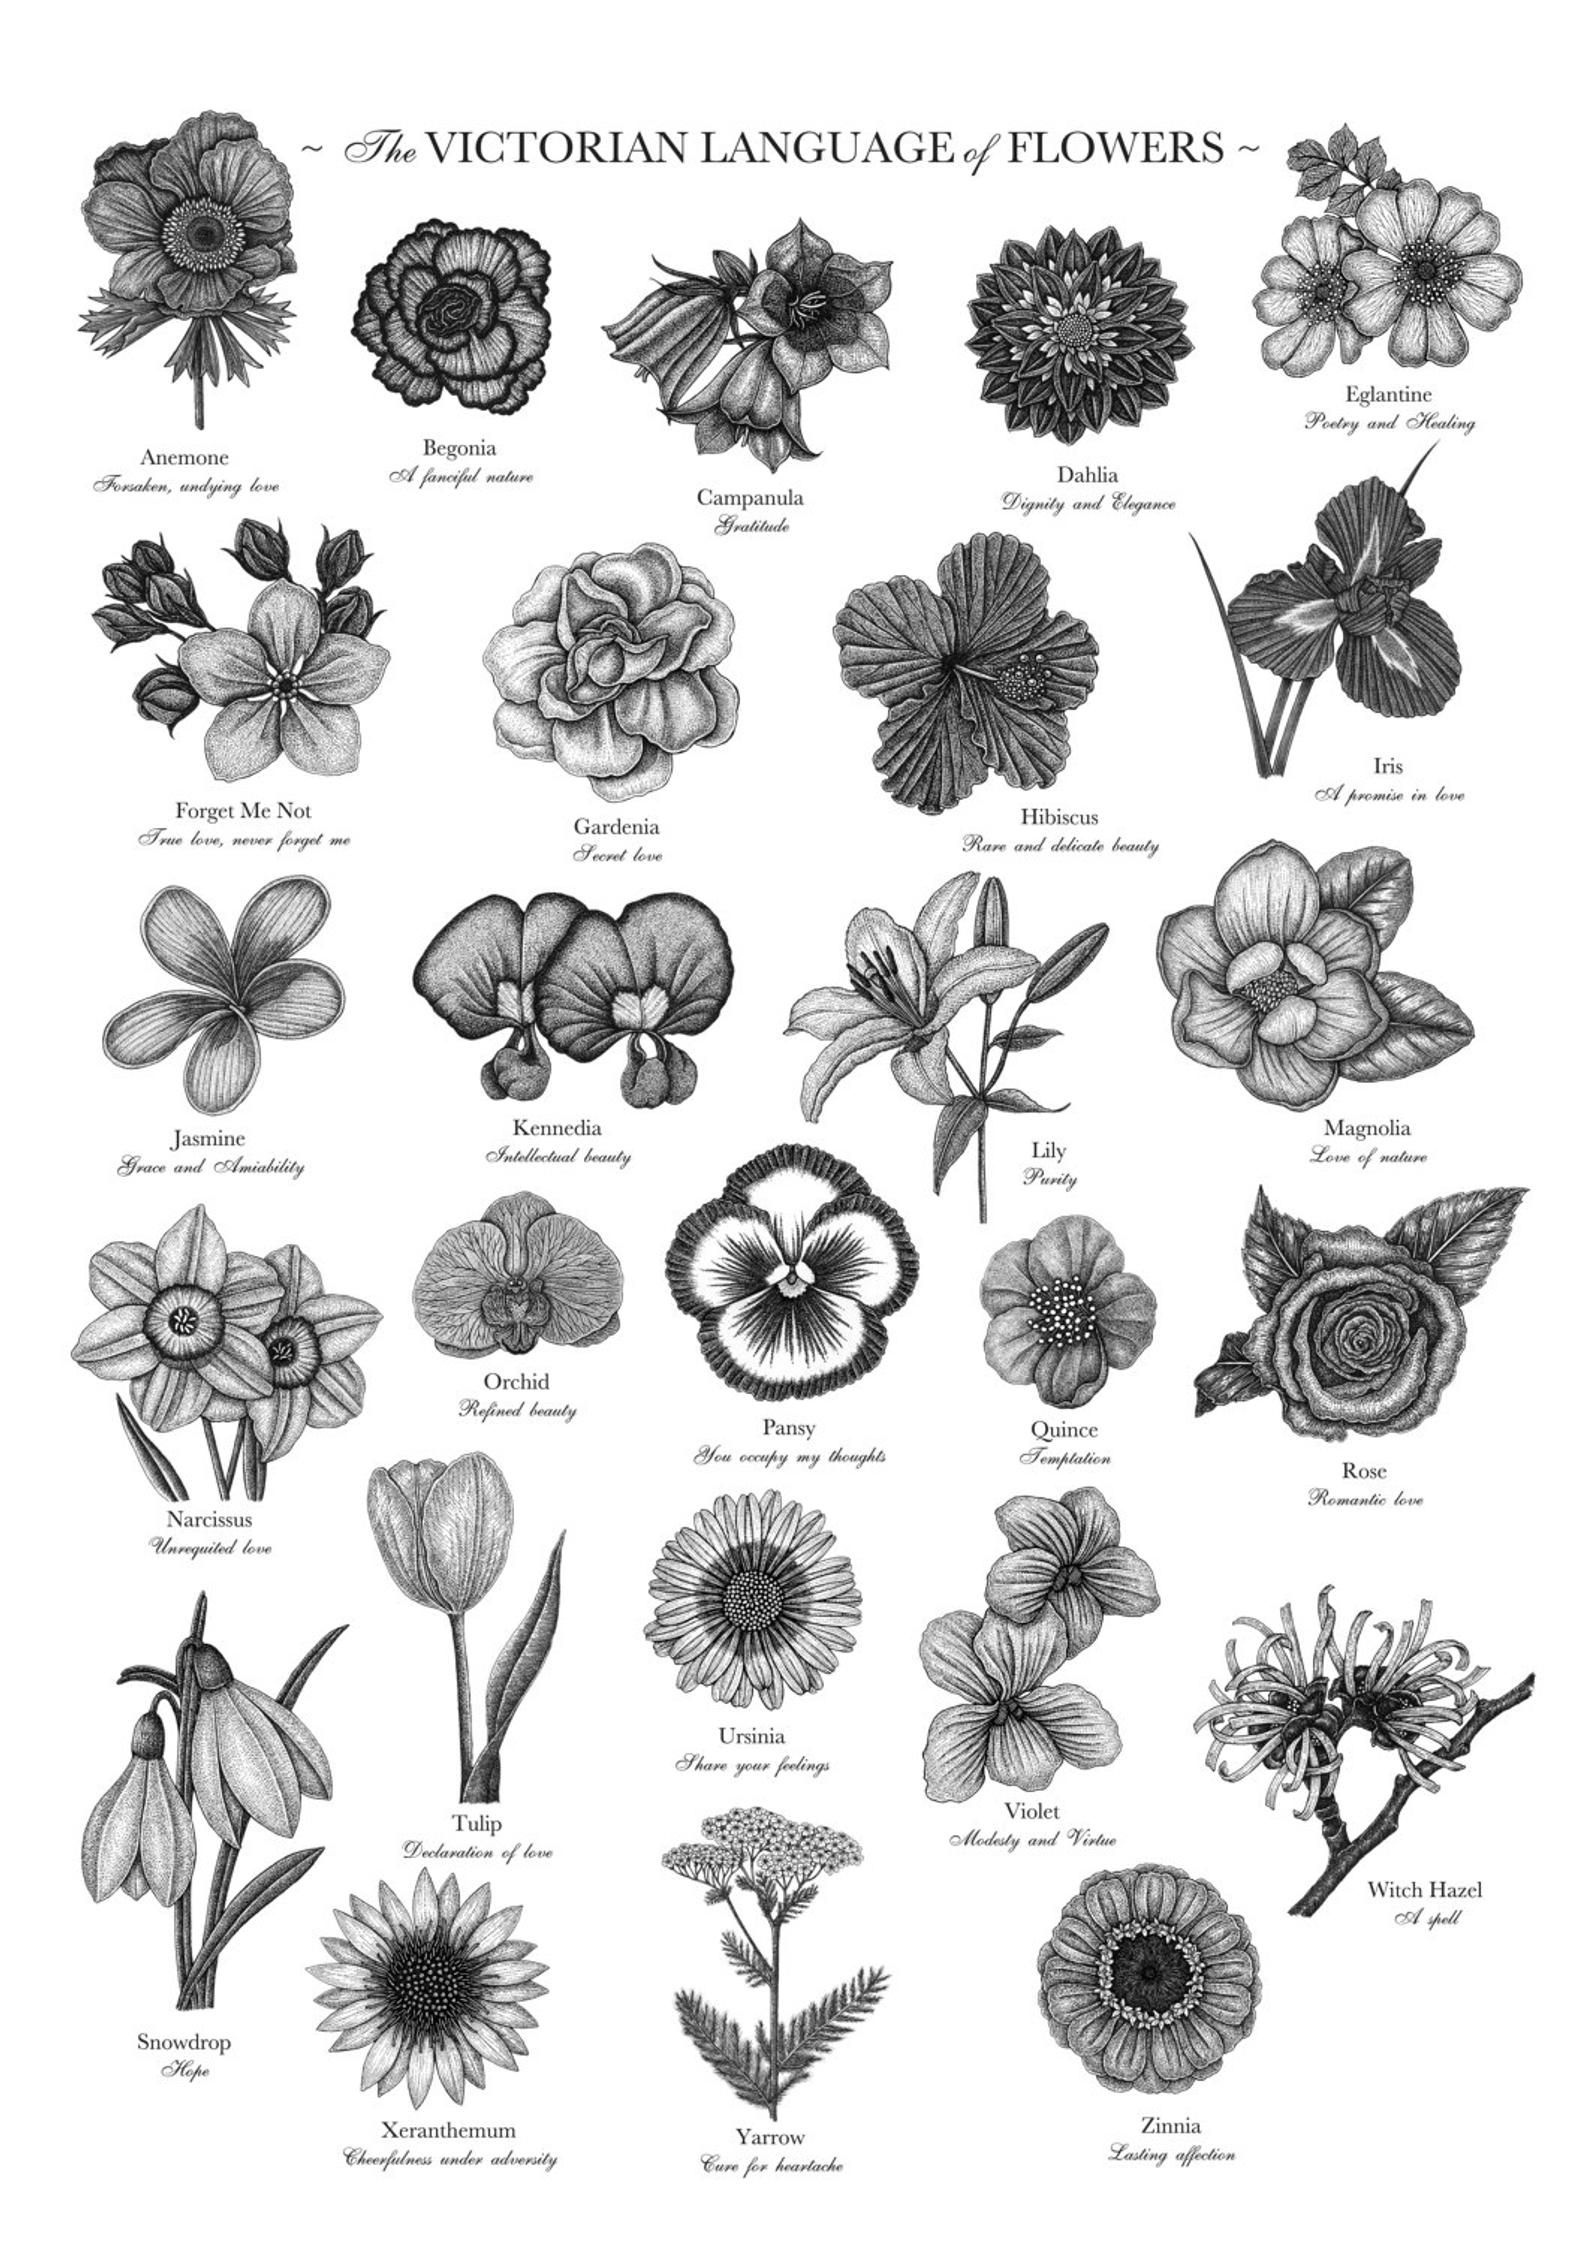 Victorian Language Of Flowers Print A To Z Of Flowers Etsy In 2020 